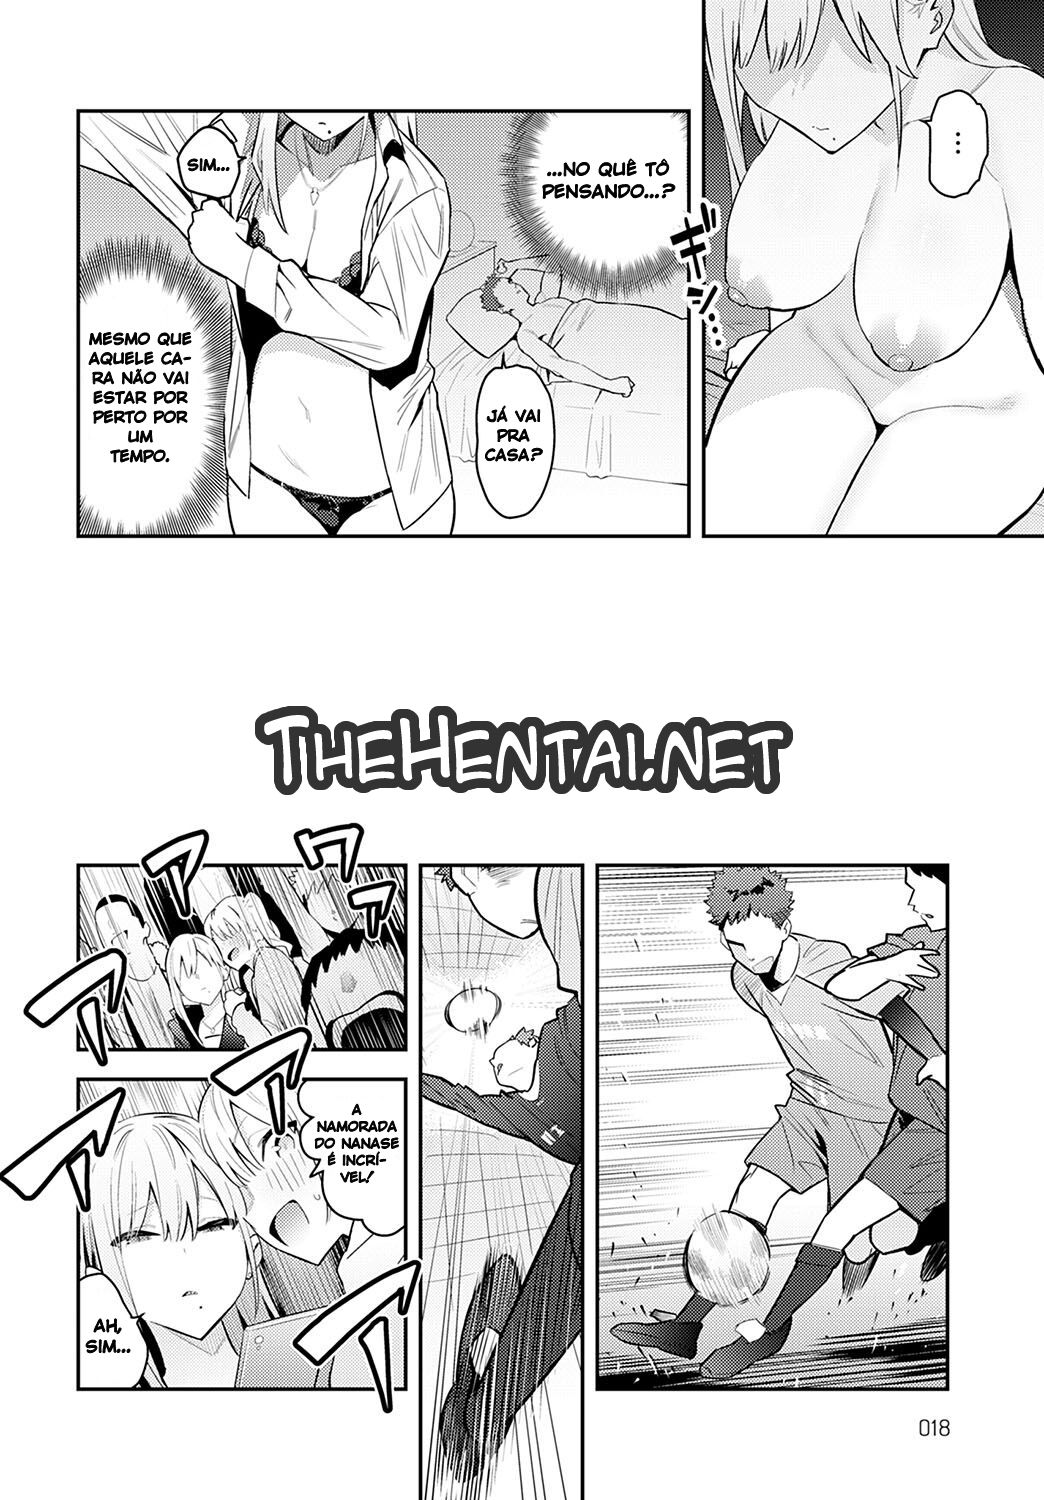 The Beauty And The Beast - The Gyaru And The Disgusting Otaku Hentai pt-br 51